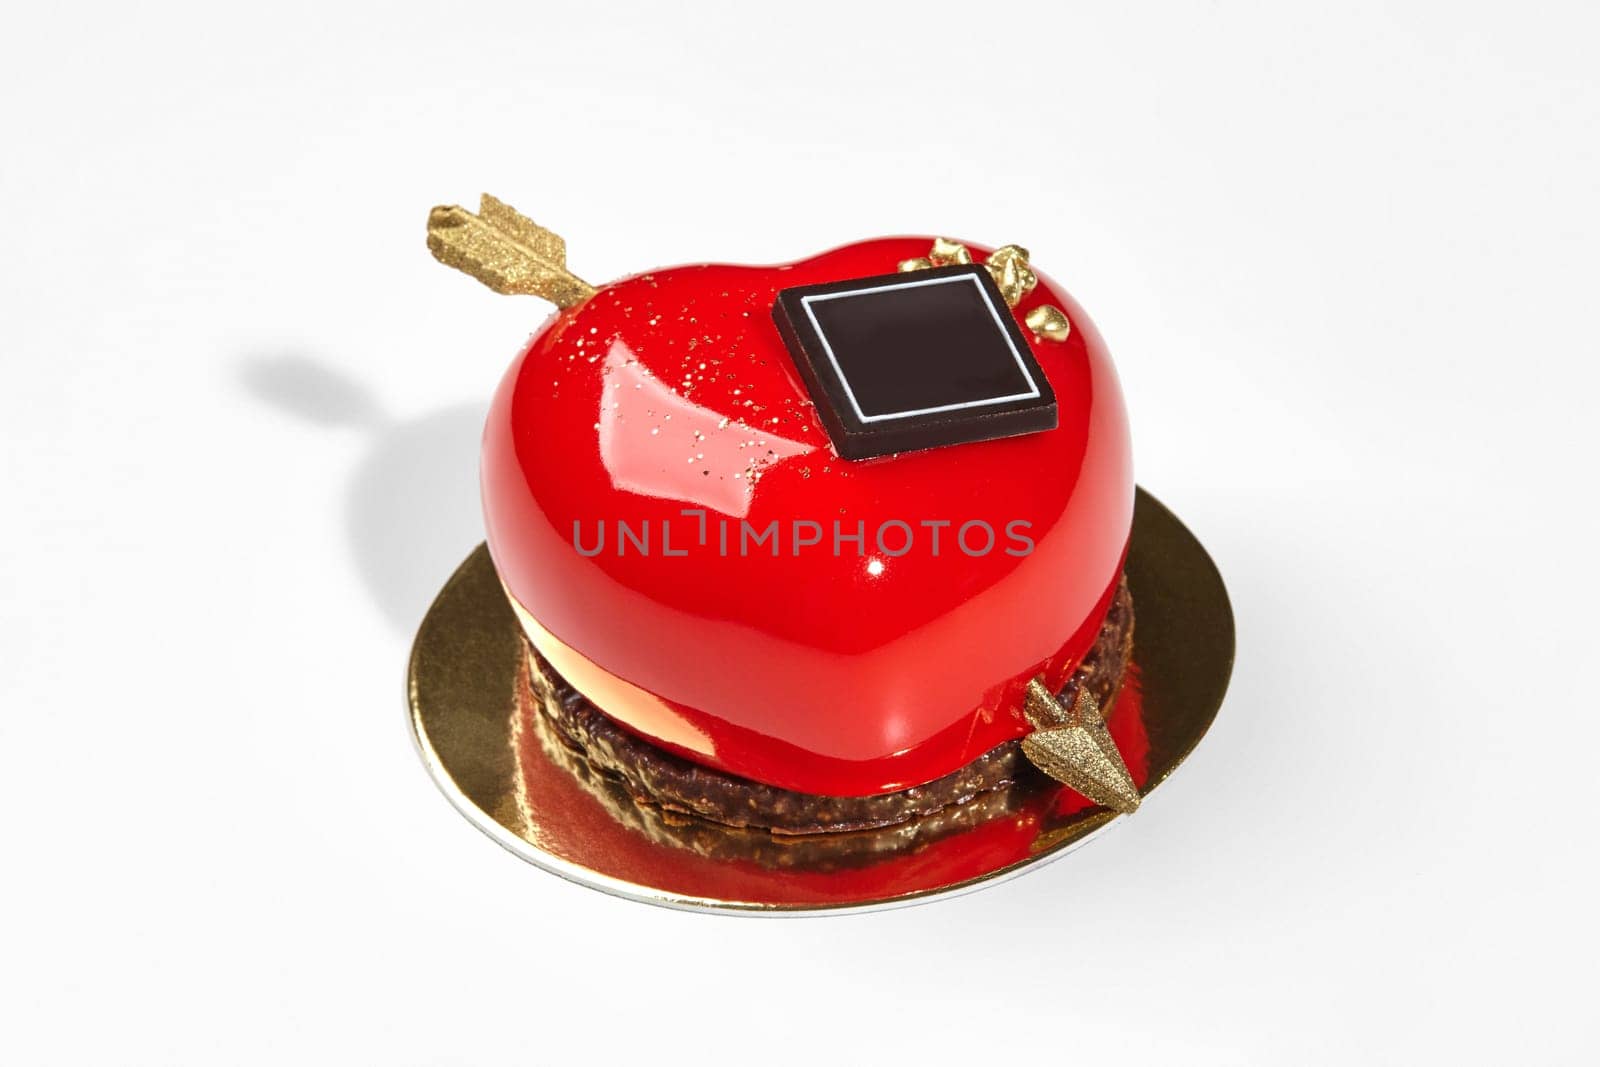 Vibrant red heart-shaped strawberry mousse cake with glossy icing, chocolate and golden arrow, perfect for celebrations of love and affection on Valentines Day, against white background